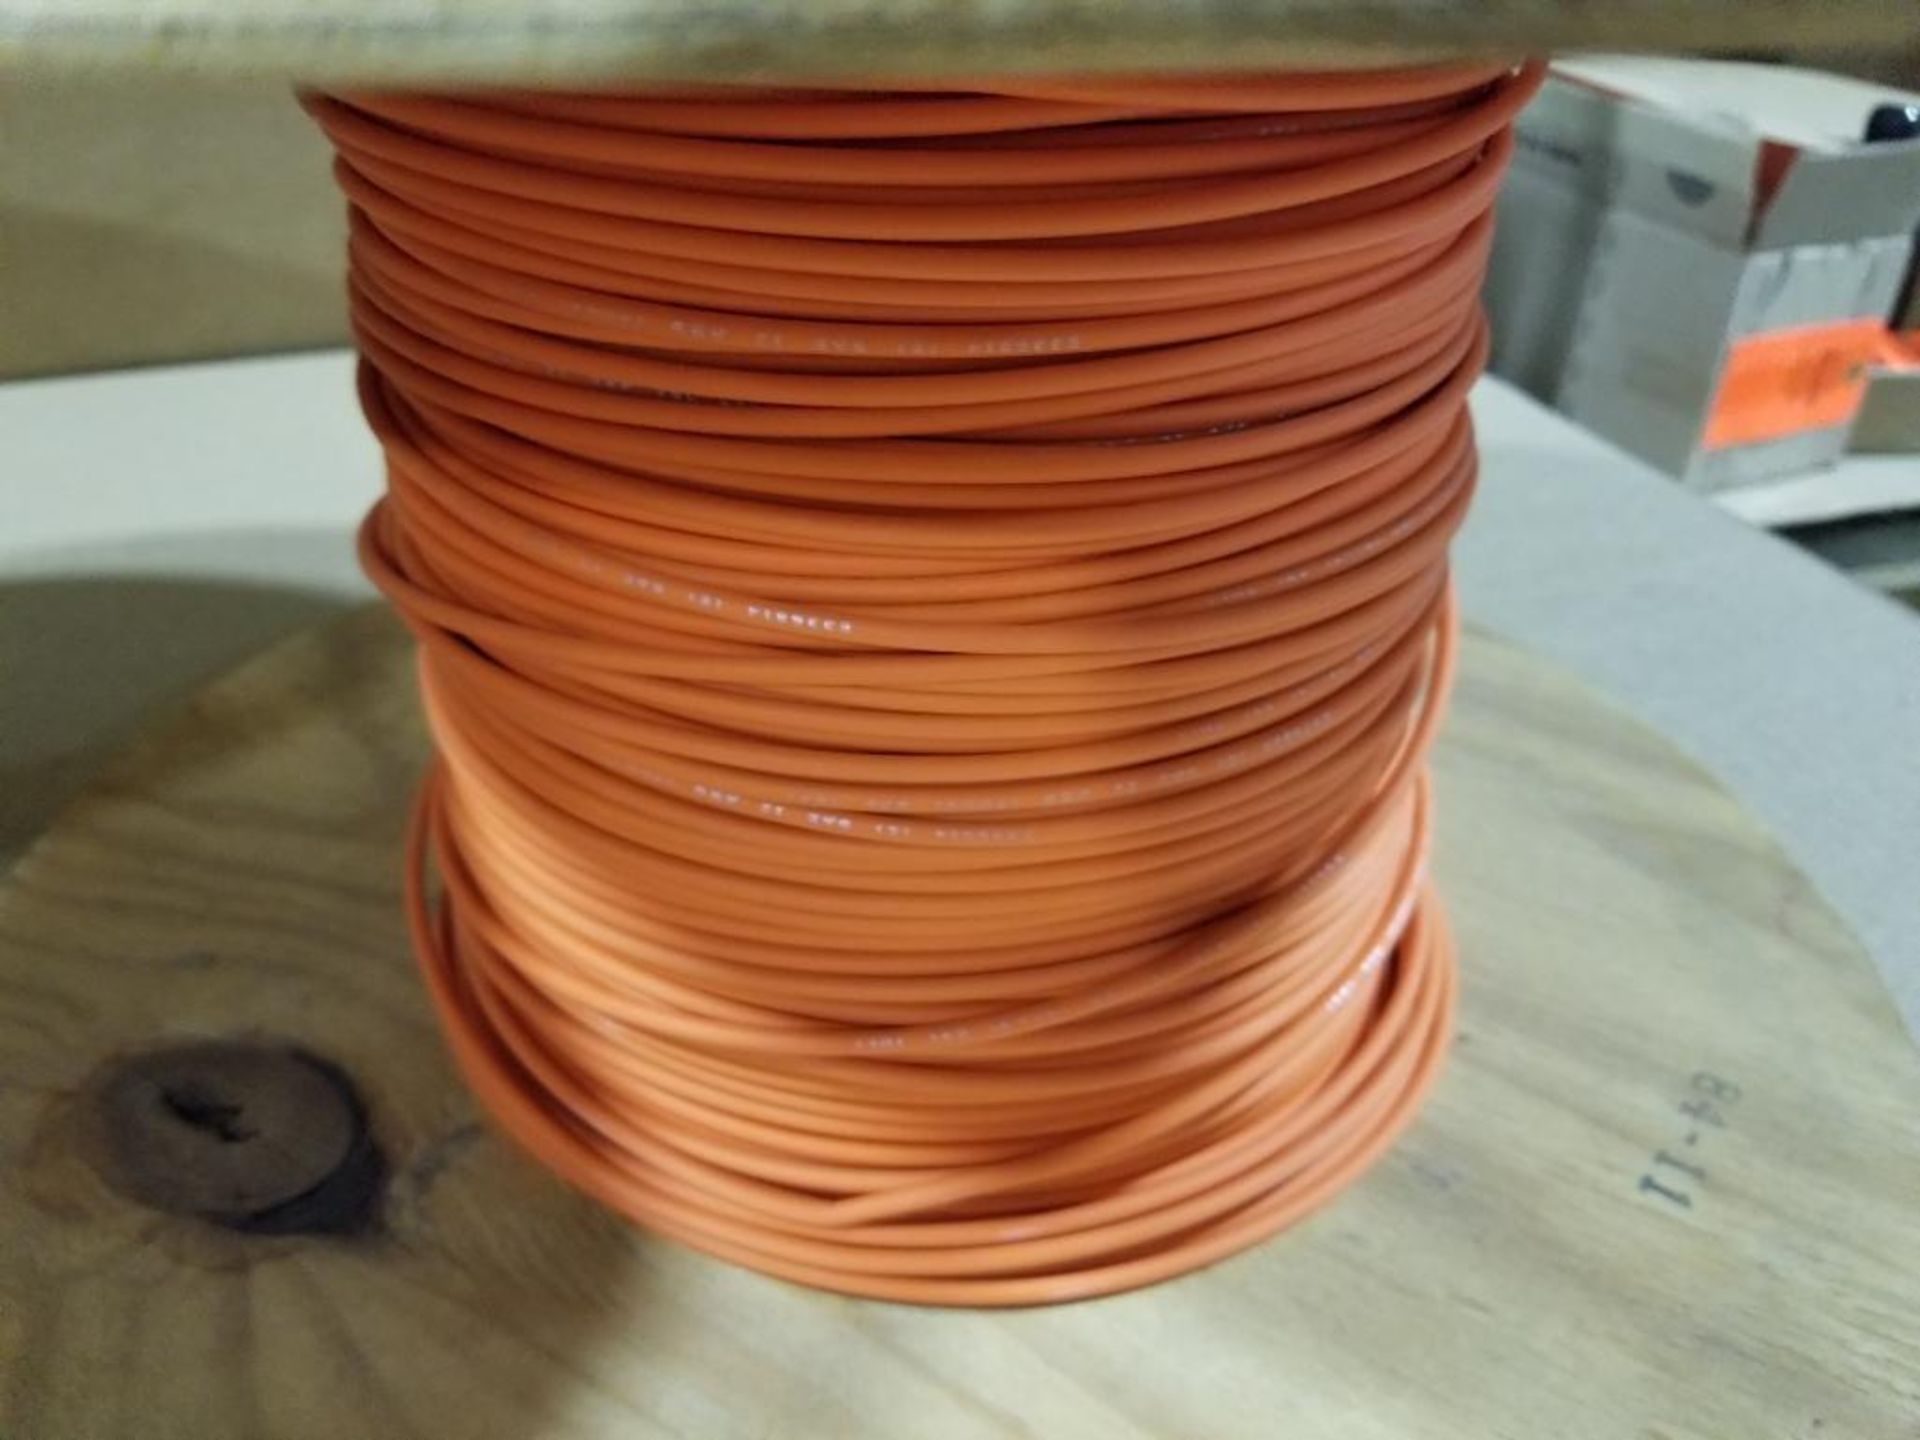 Qty 2 - 16 and 12 awg  assorted color copper wire. 44lbs total gross combined weight for all rolls. - Image 5 of 7